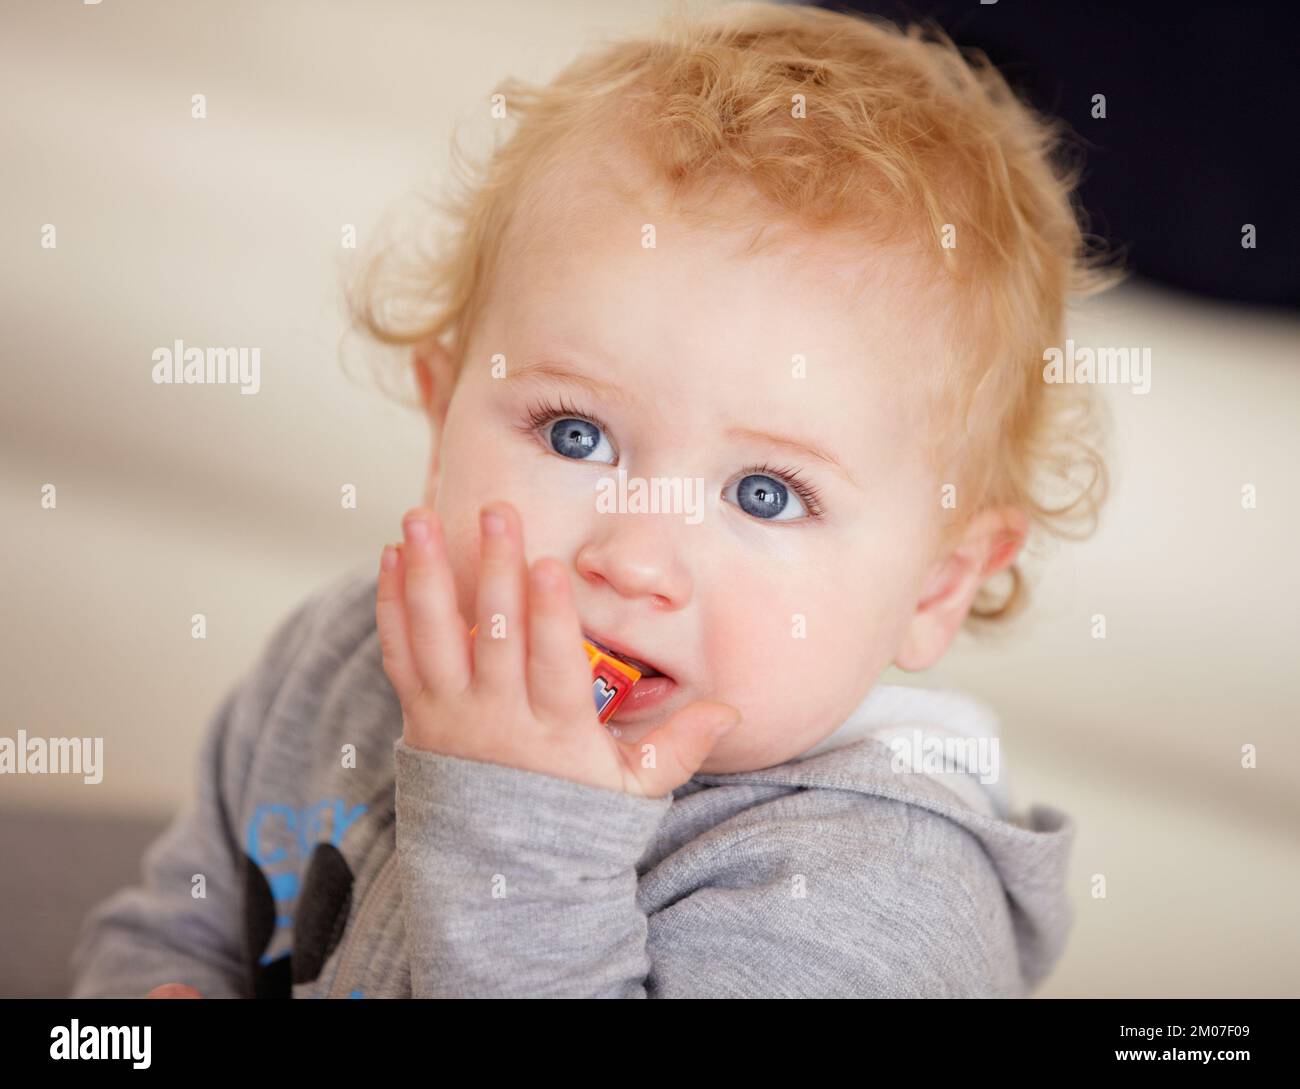 Tiny cutie. Cute baby boy looking up while sitting on the floor. Stock Photo